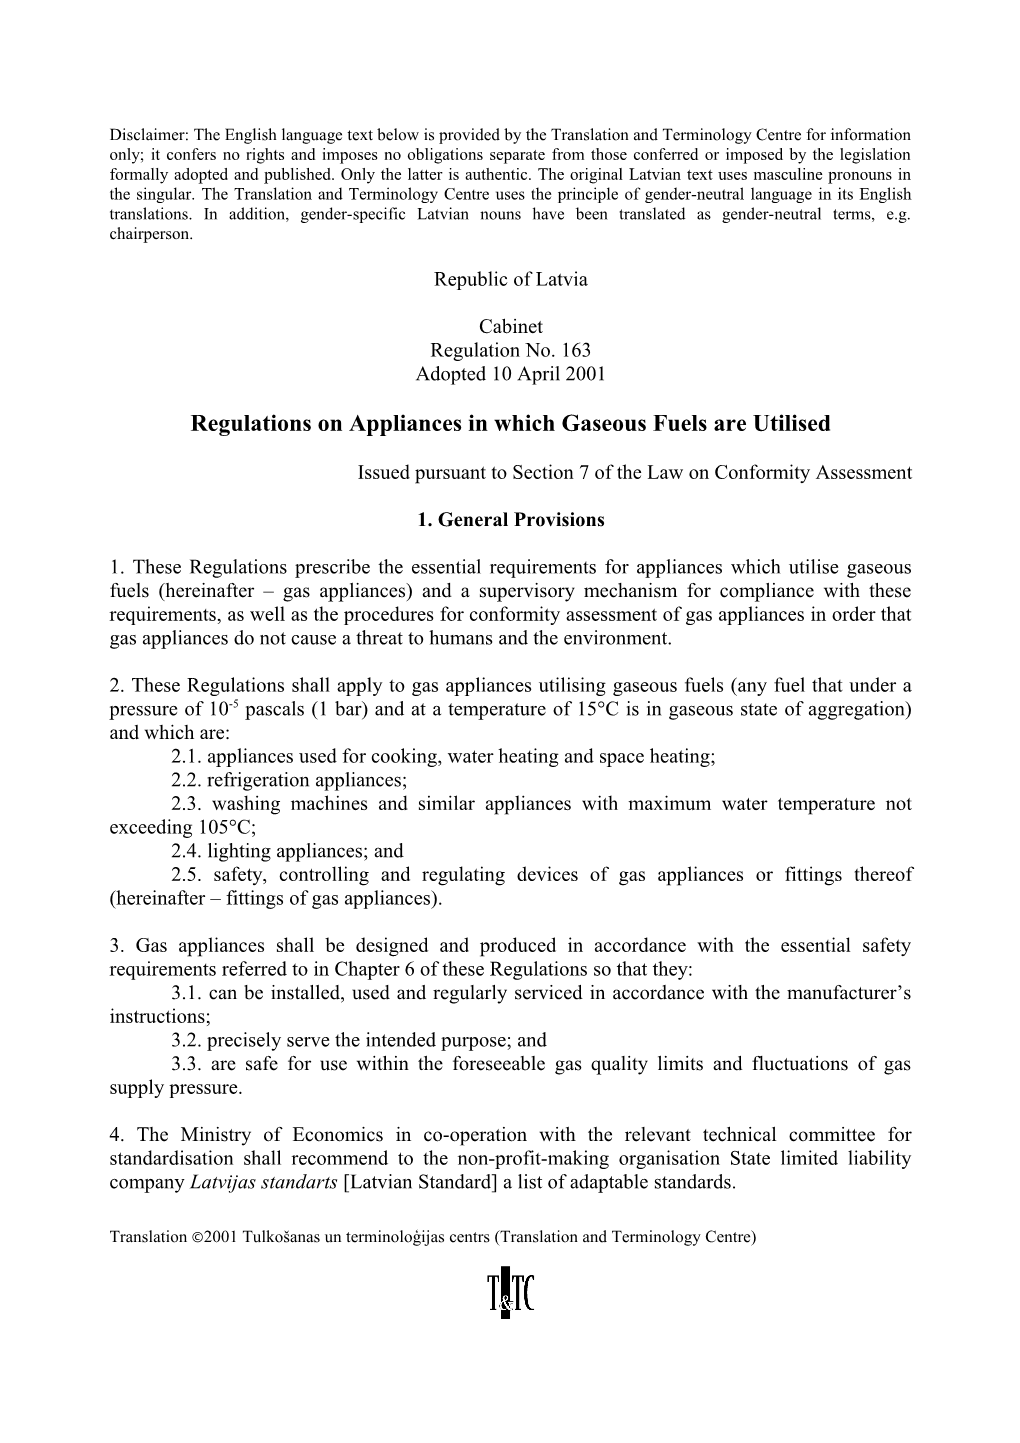 Regulations on Appliances in Which Gaseous Fuels Are Utilised